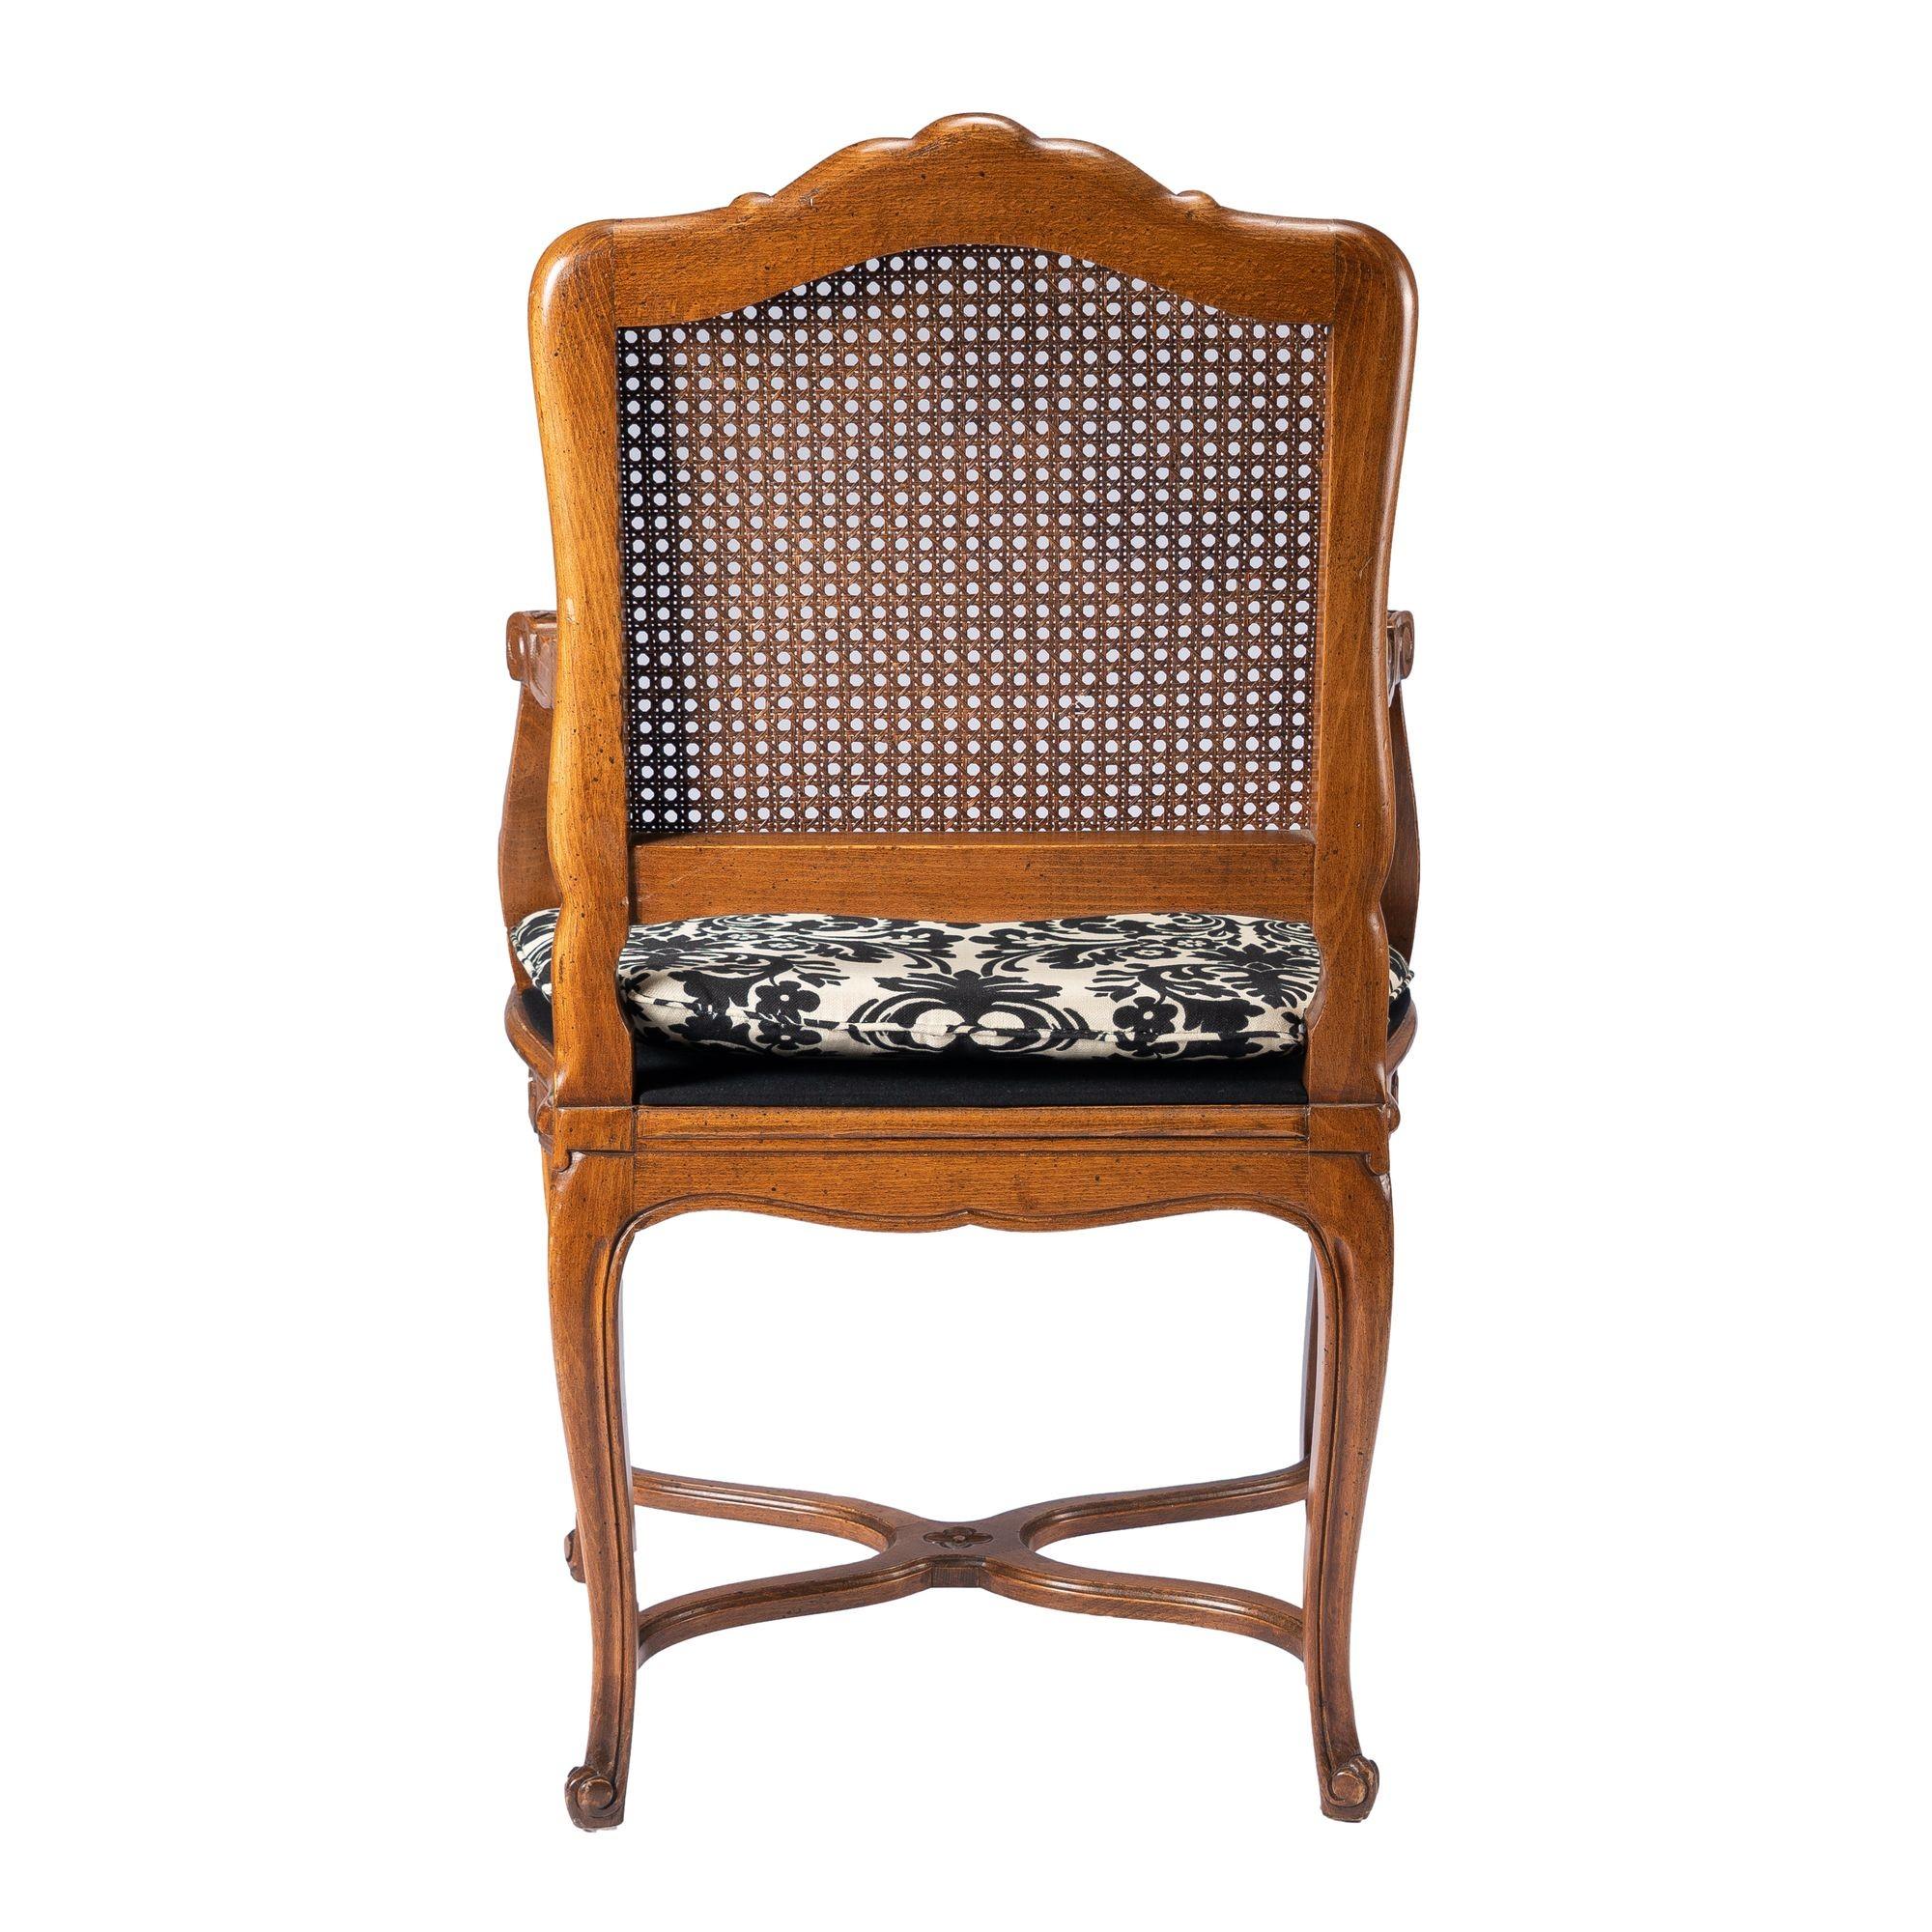 20th Century French Louis XVl style fauteuil, c. 1900's For Sale